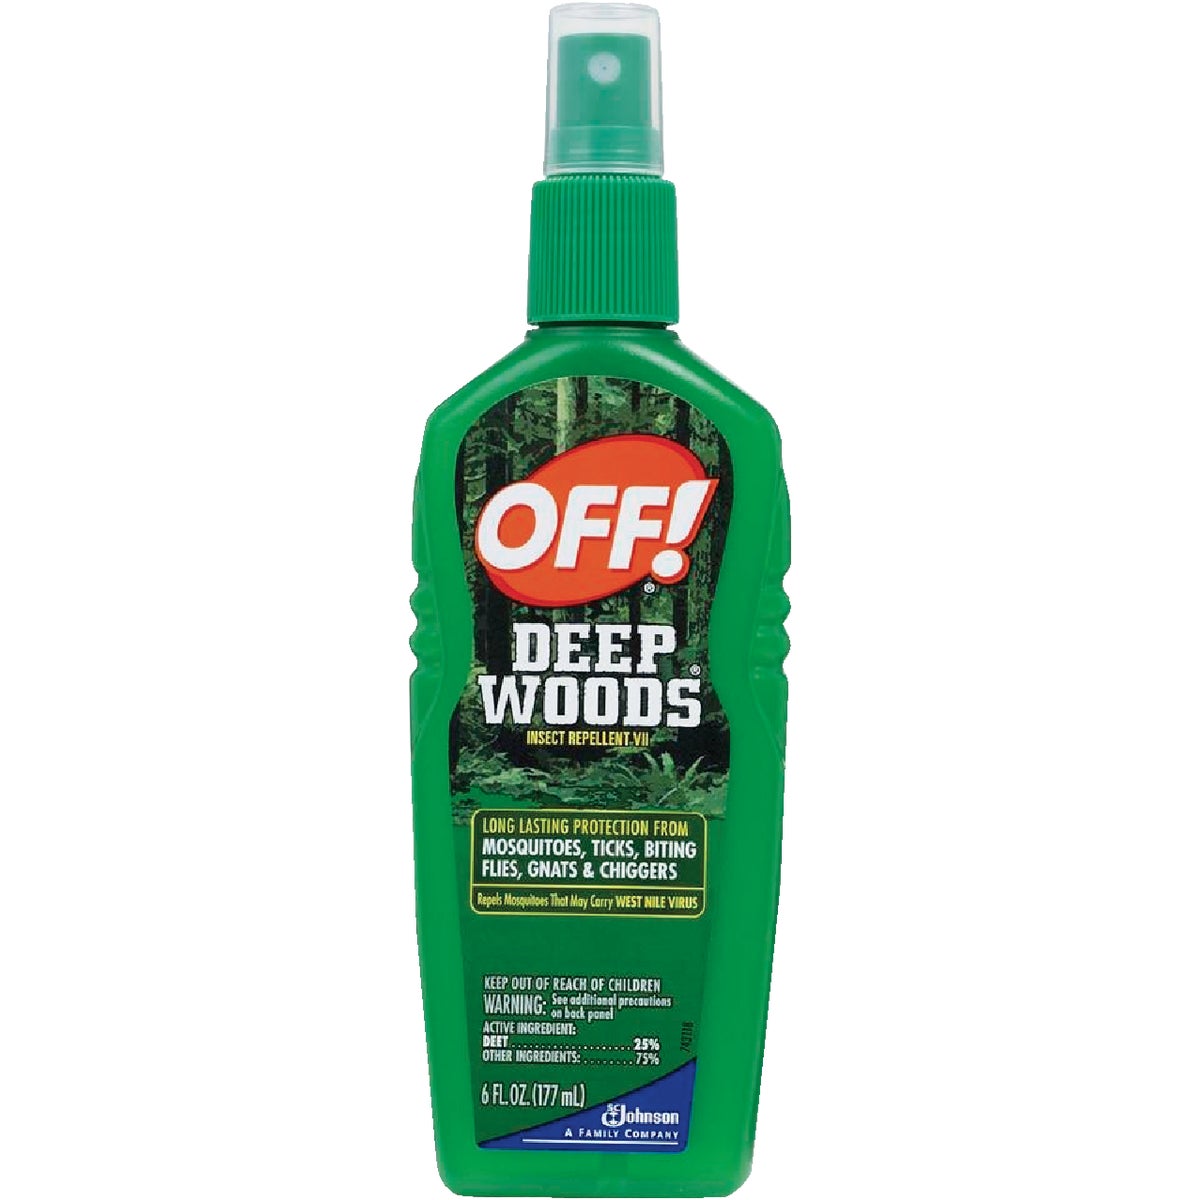 Deep Woods Off 6 Oz. Insect Repellent Pump Spray